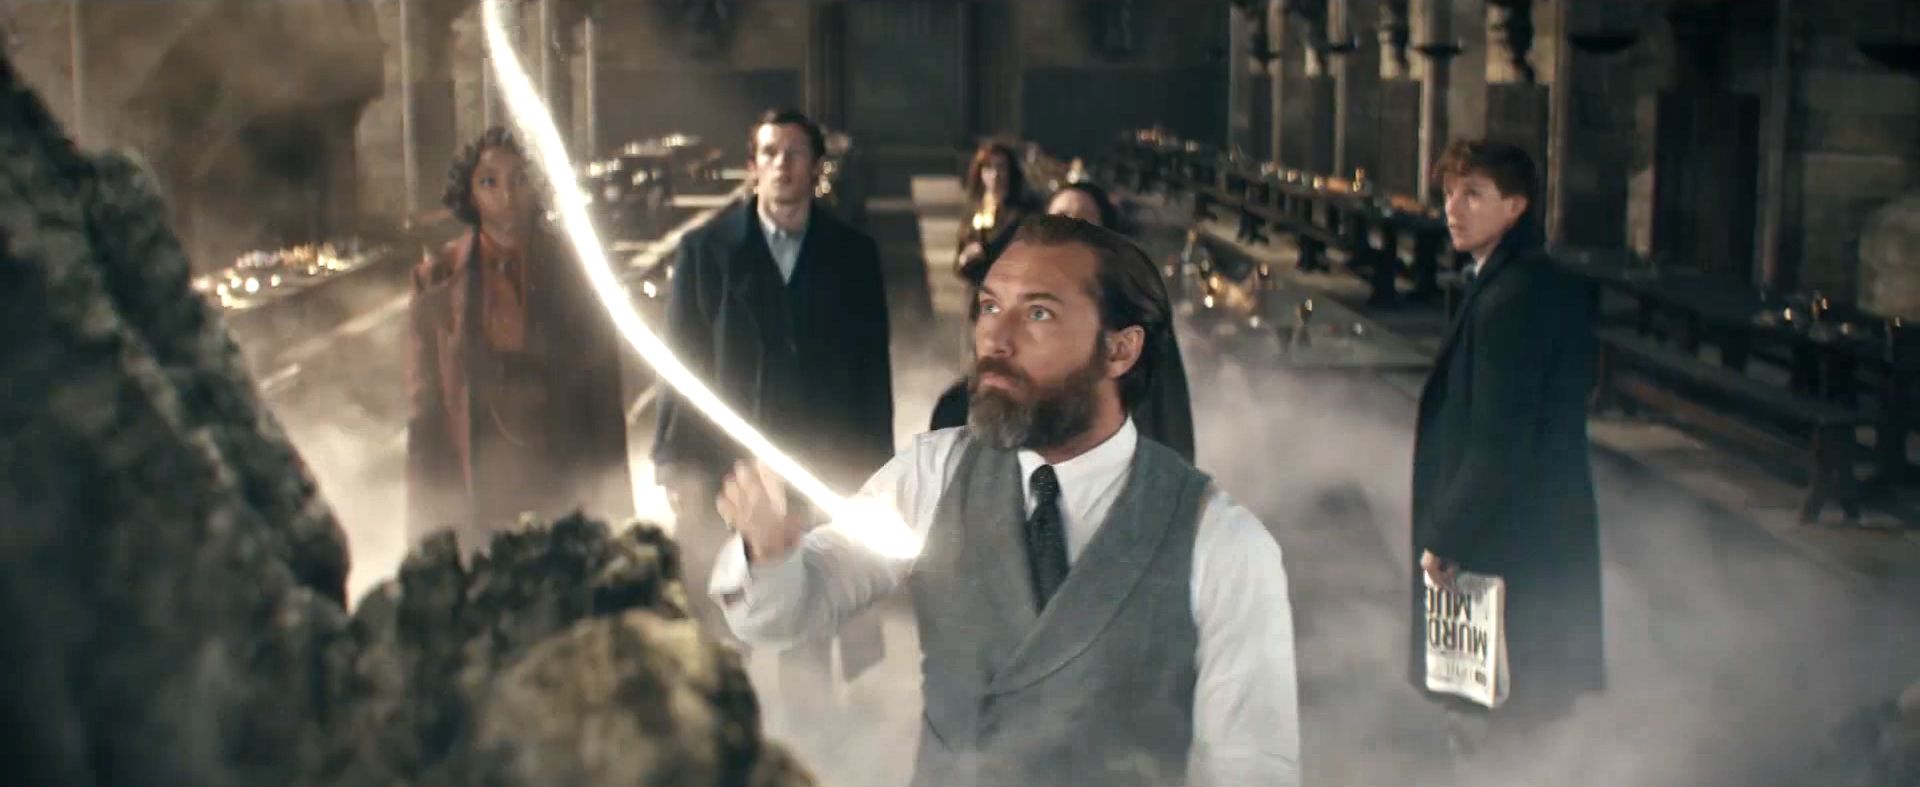 Fantastic Beasts 3 trailer released by WB